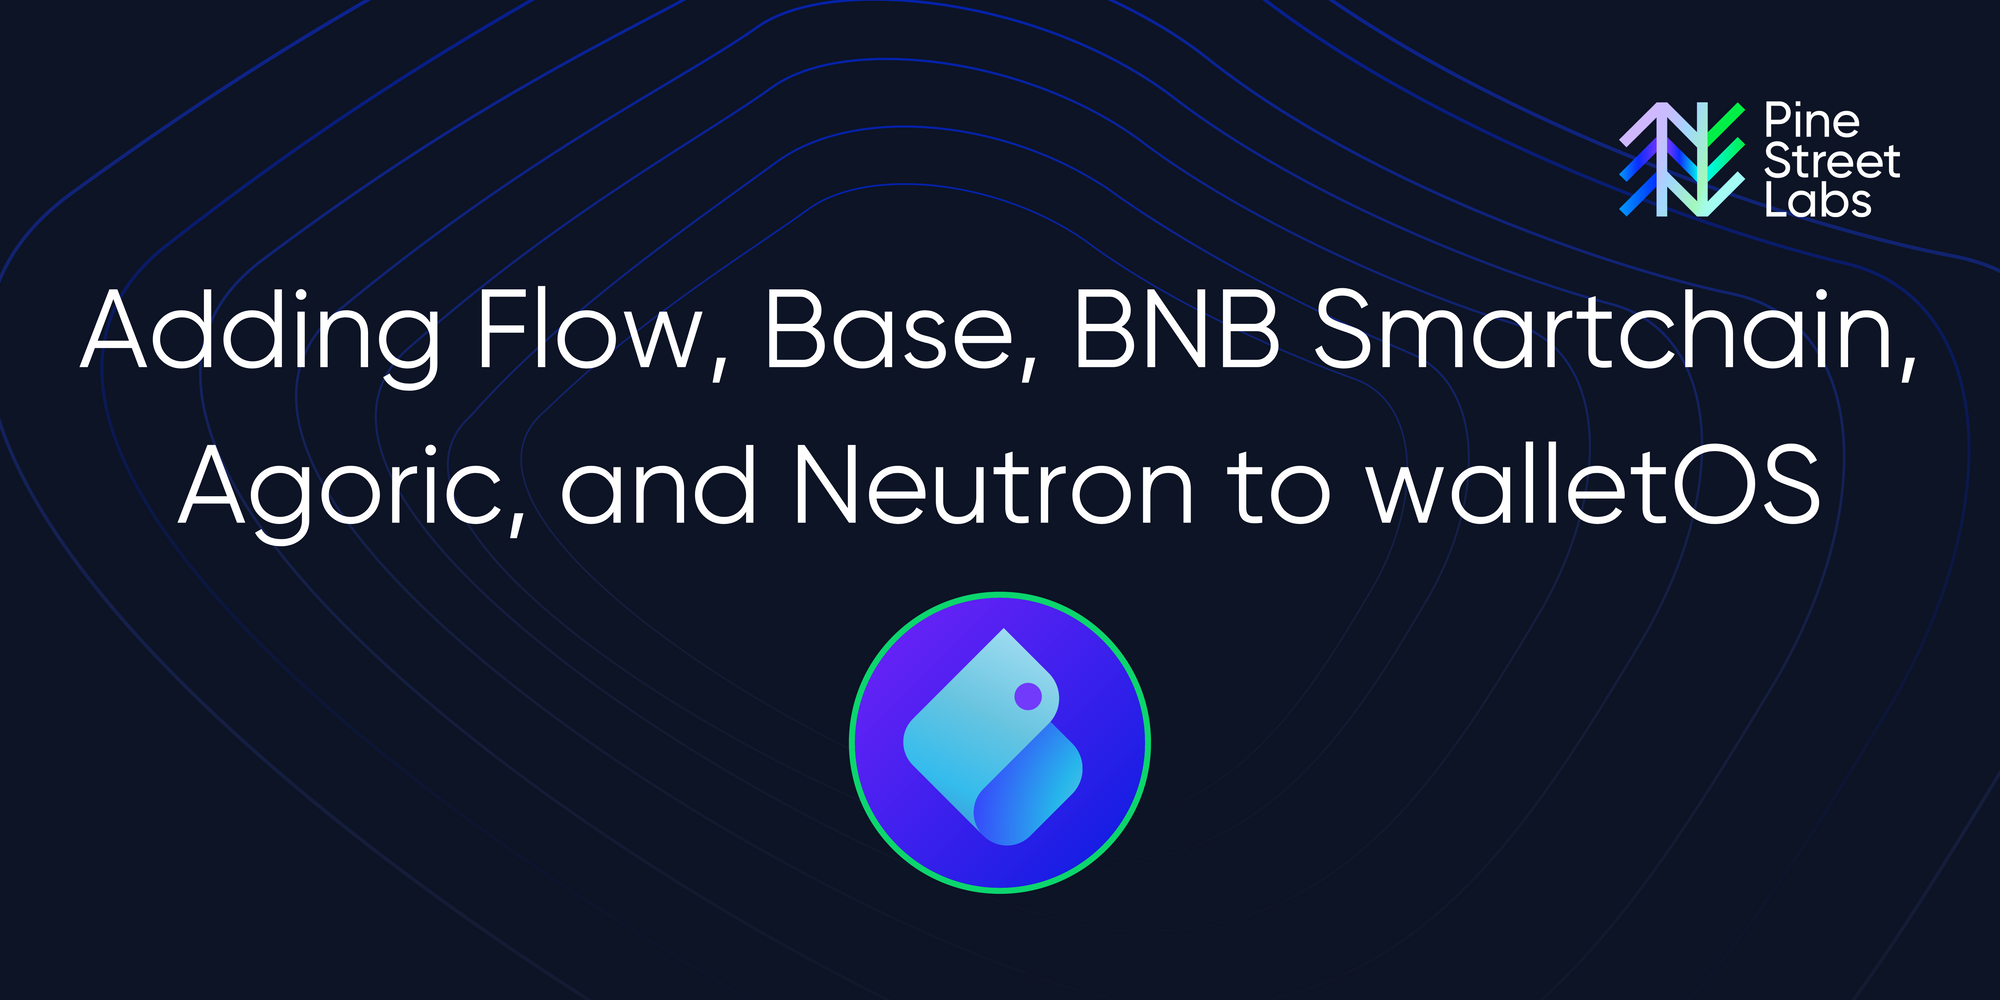 Adding Flow, Base, BNB Smartchain, Agoric, and Neutron to walletOS